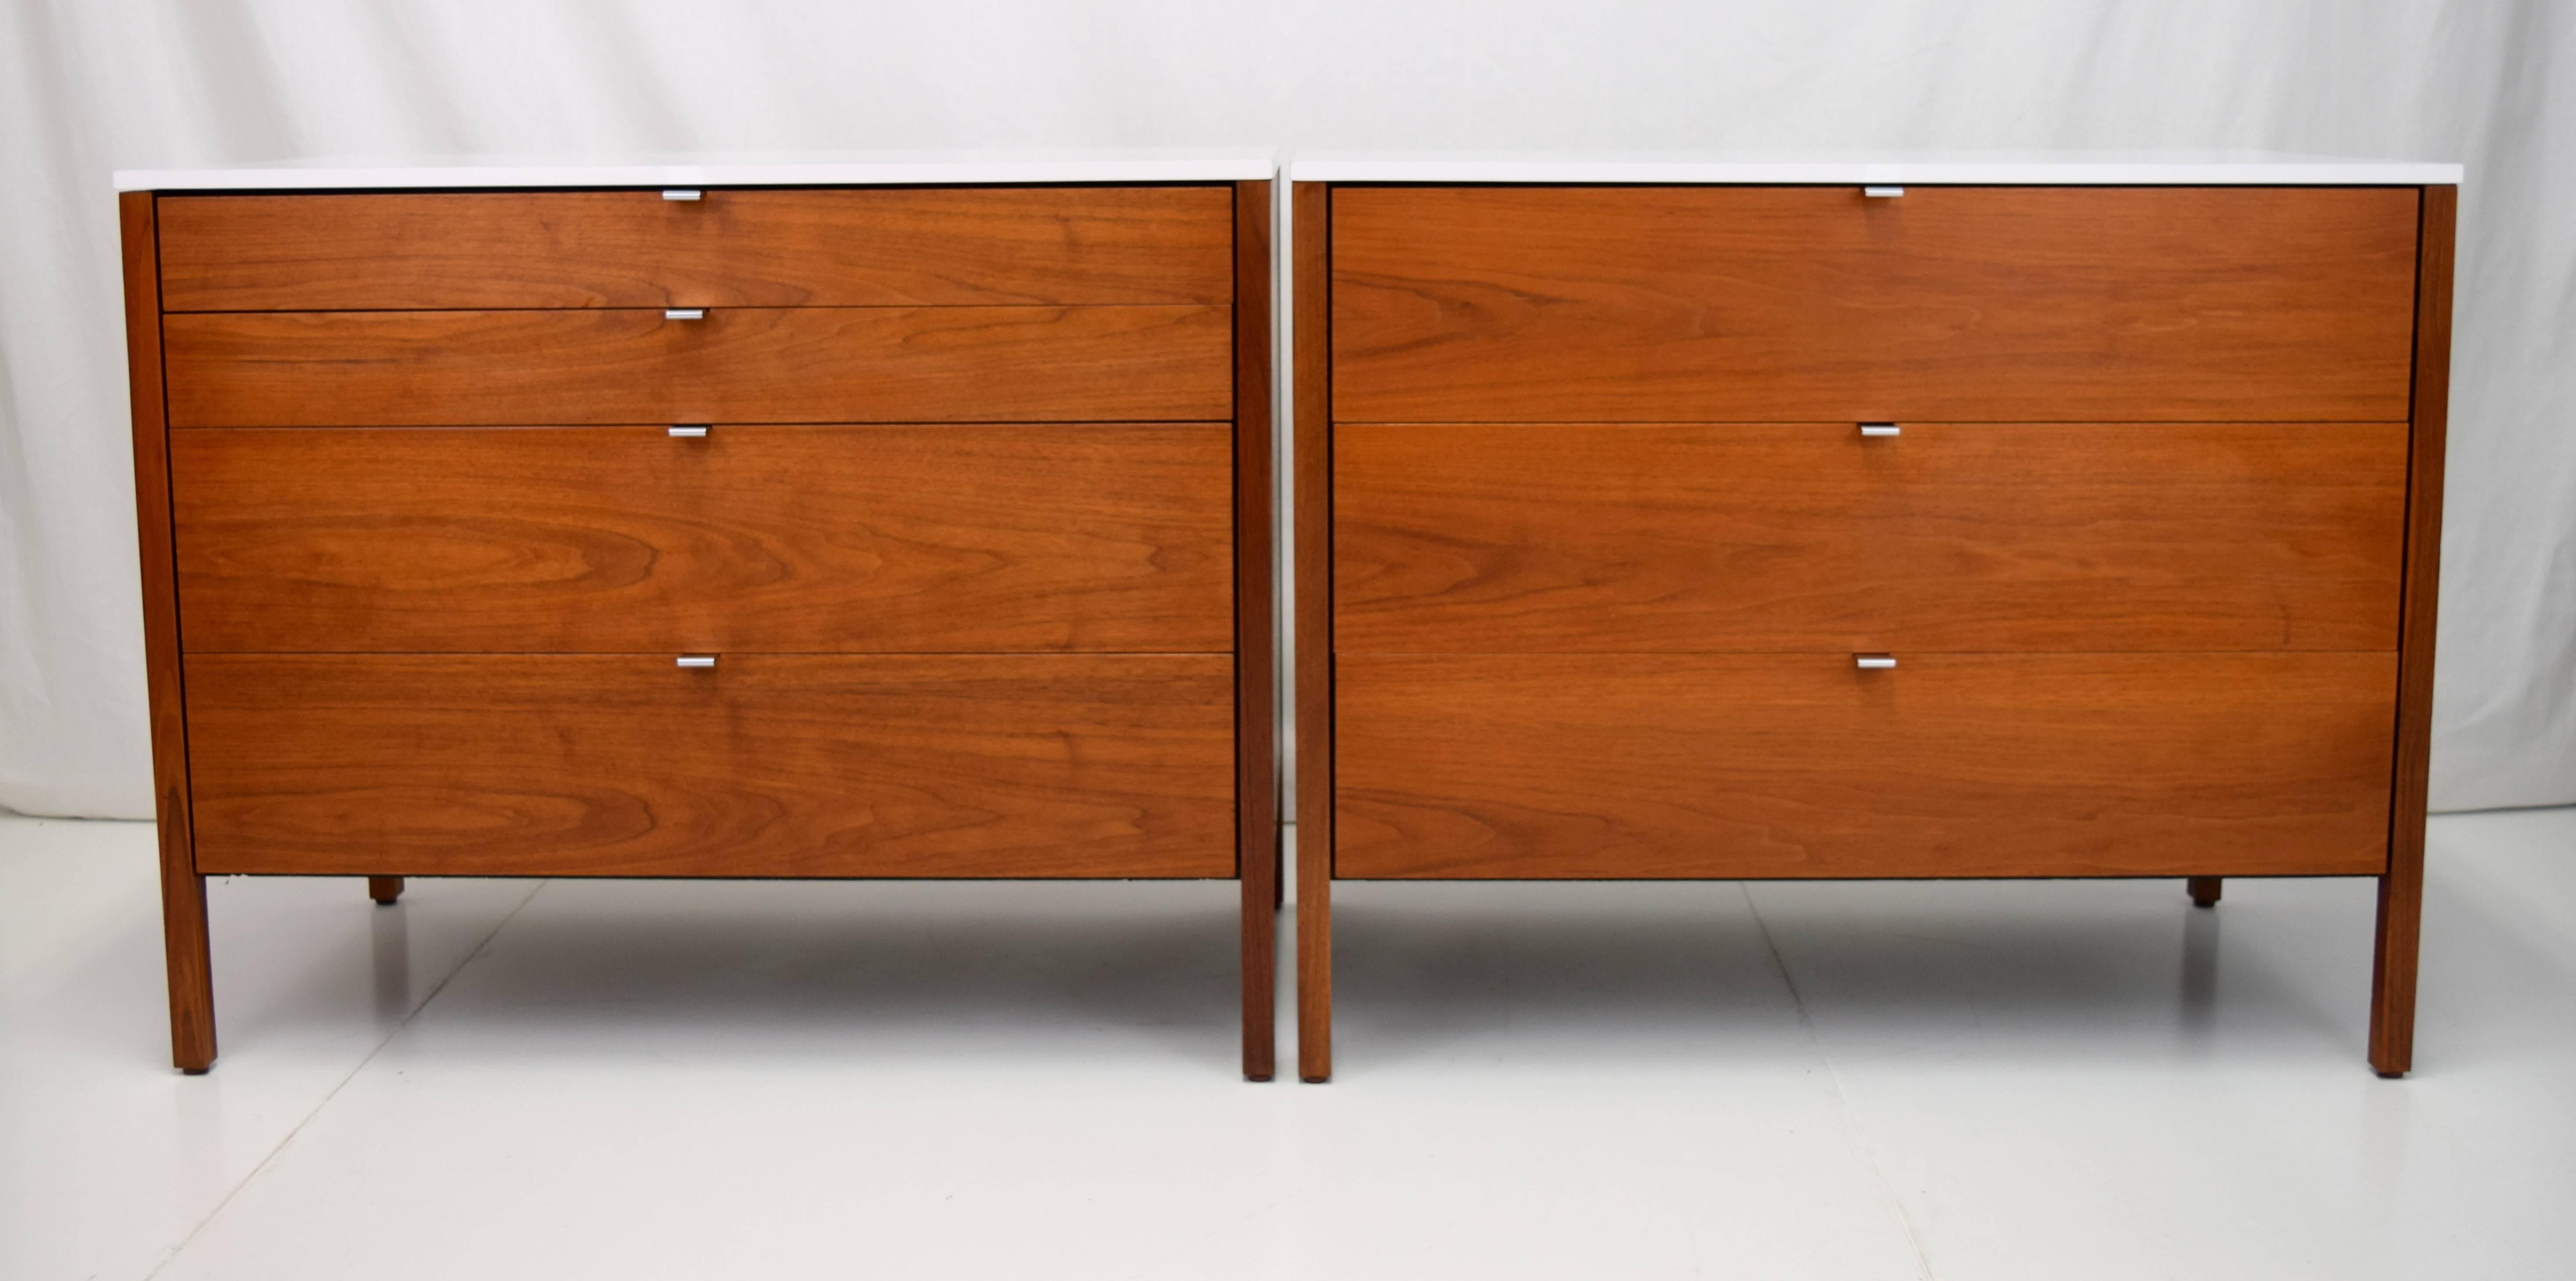 Fantastic walnut and white laminate dresser set by Florence Knoll. Set consist of one three-drawer chest, one four-drawer chest, and a removable single drawer desk/ vanity. Elegant polished chrome recessed pulls gleam from original walnut frame with